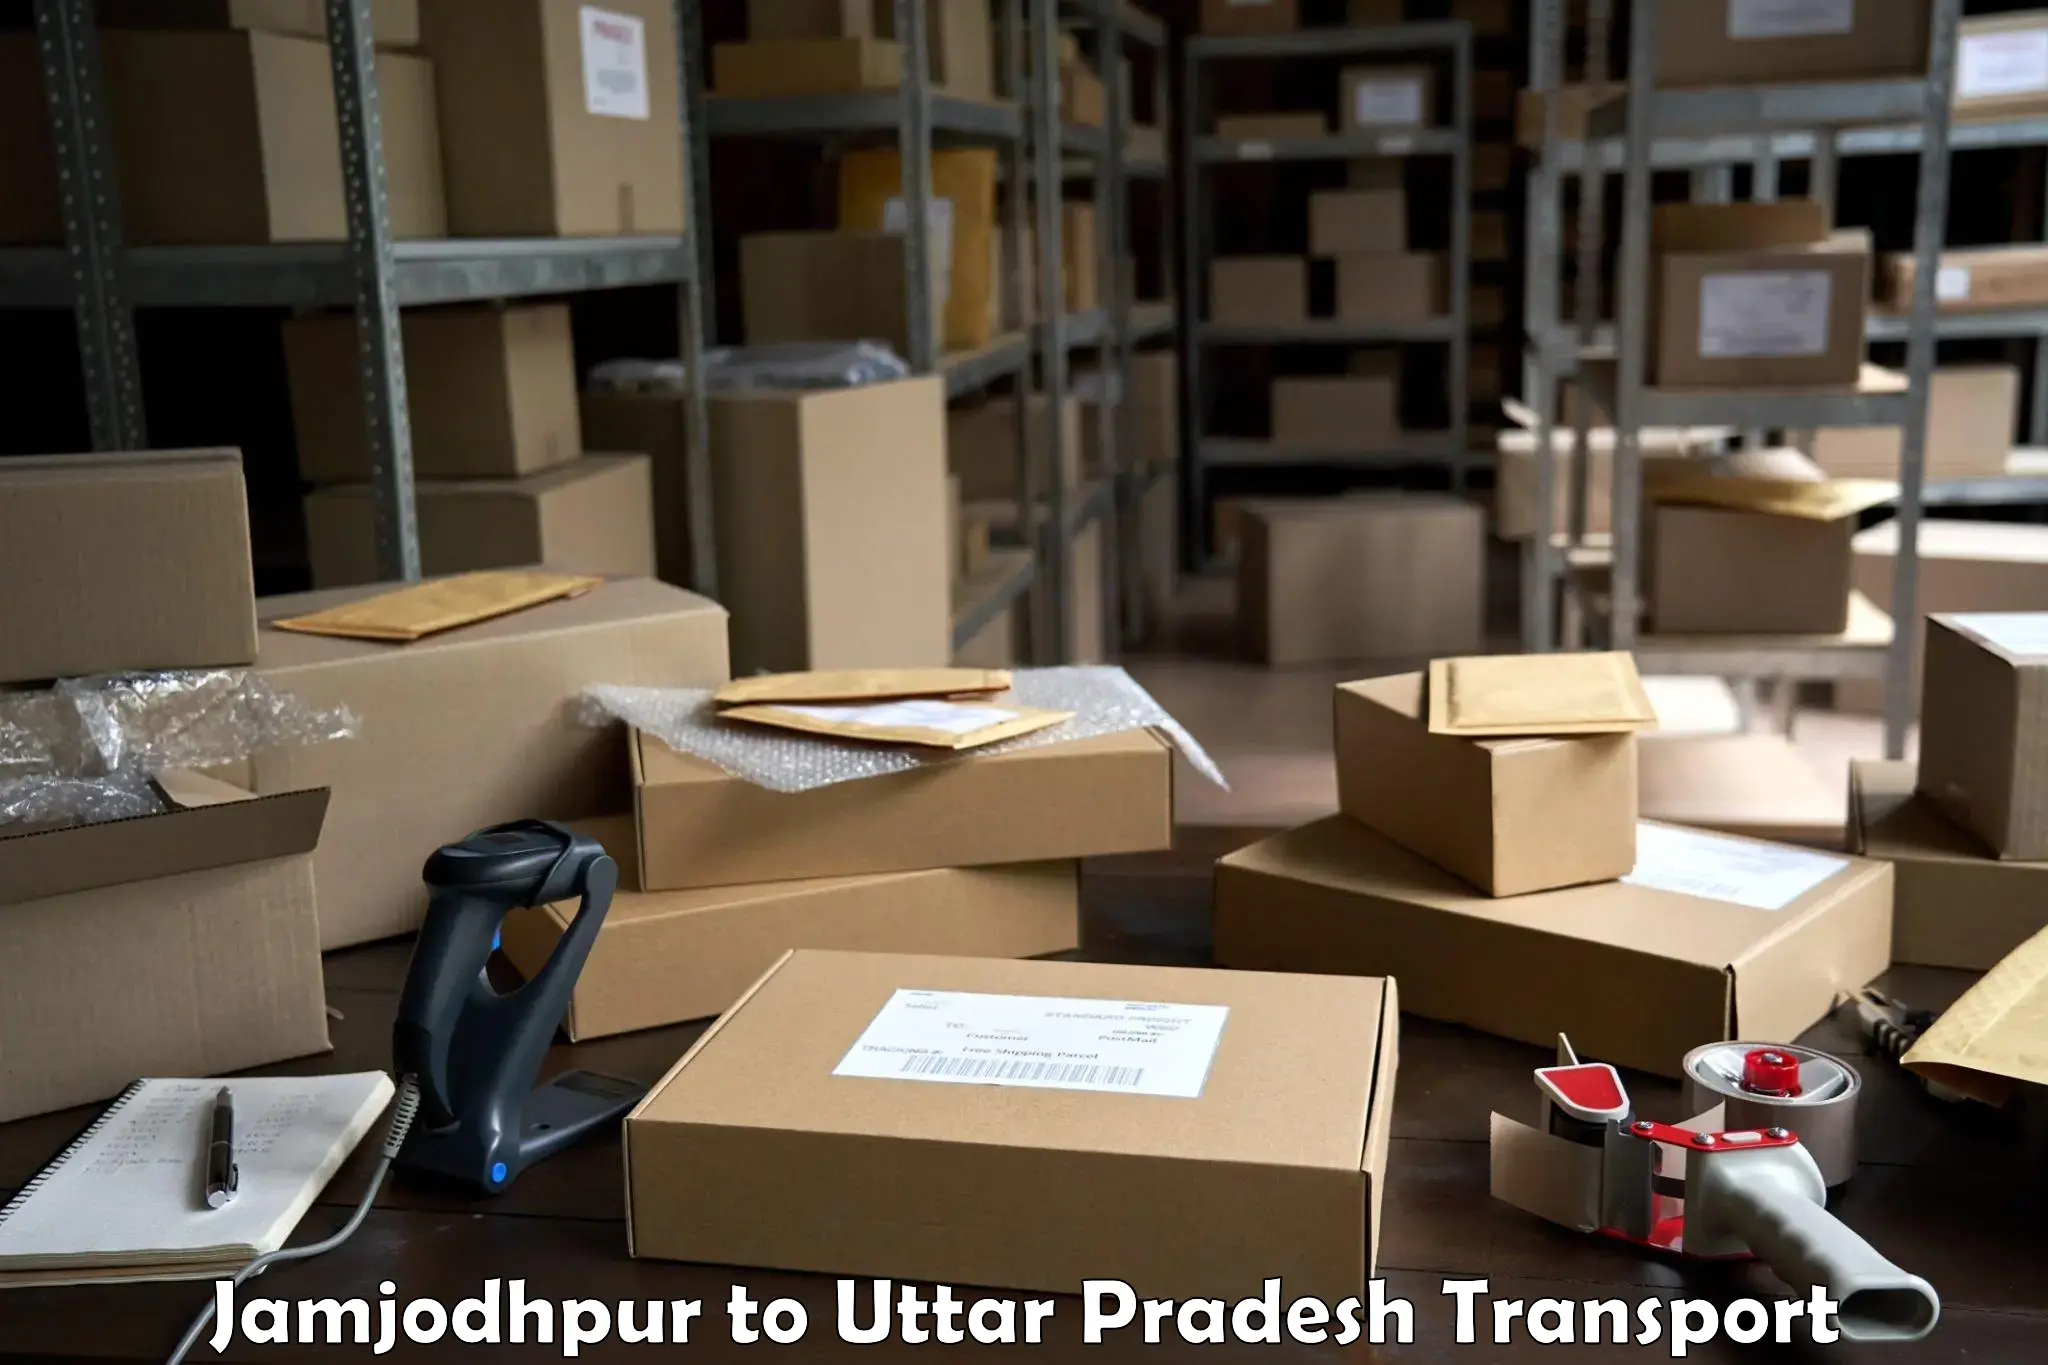 Luggage transport services in Jamjodhpur to Fatehabad Agra